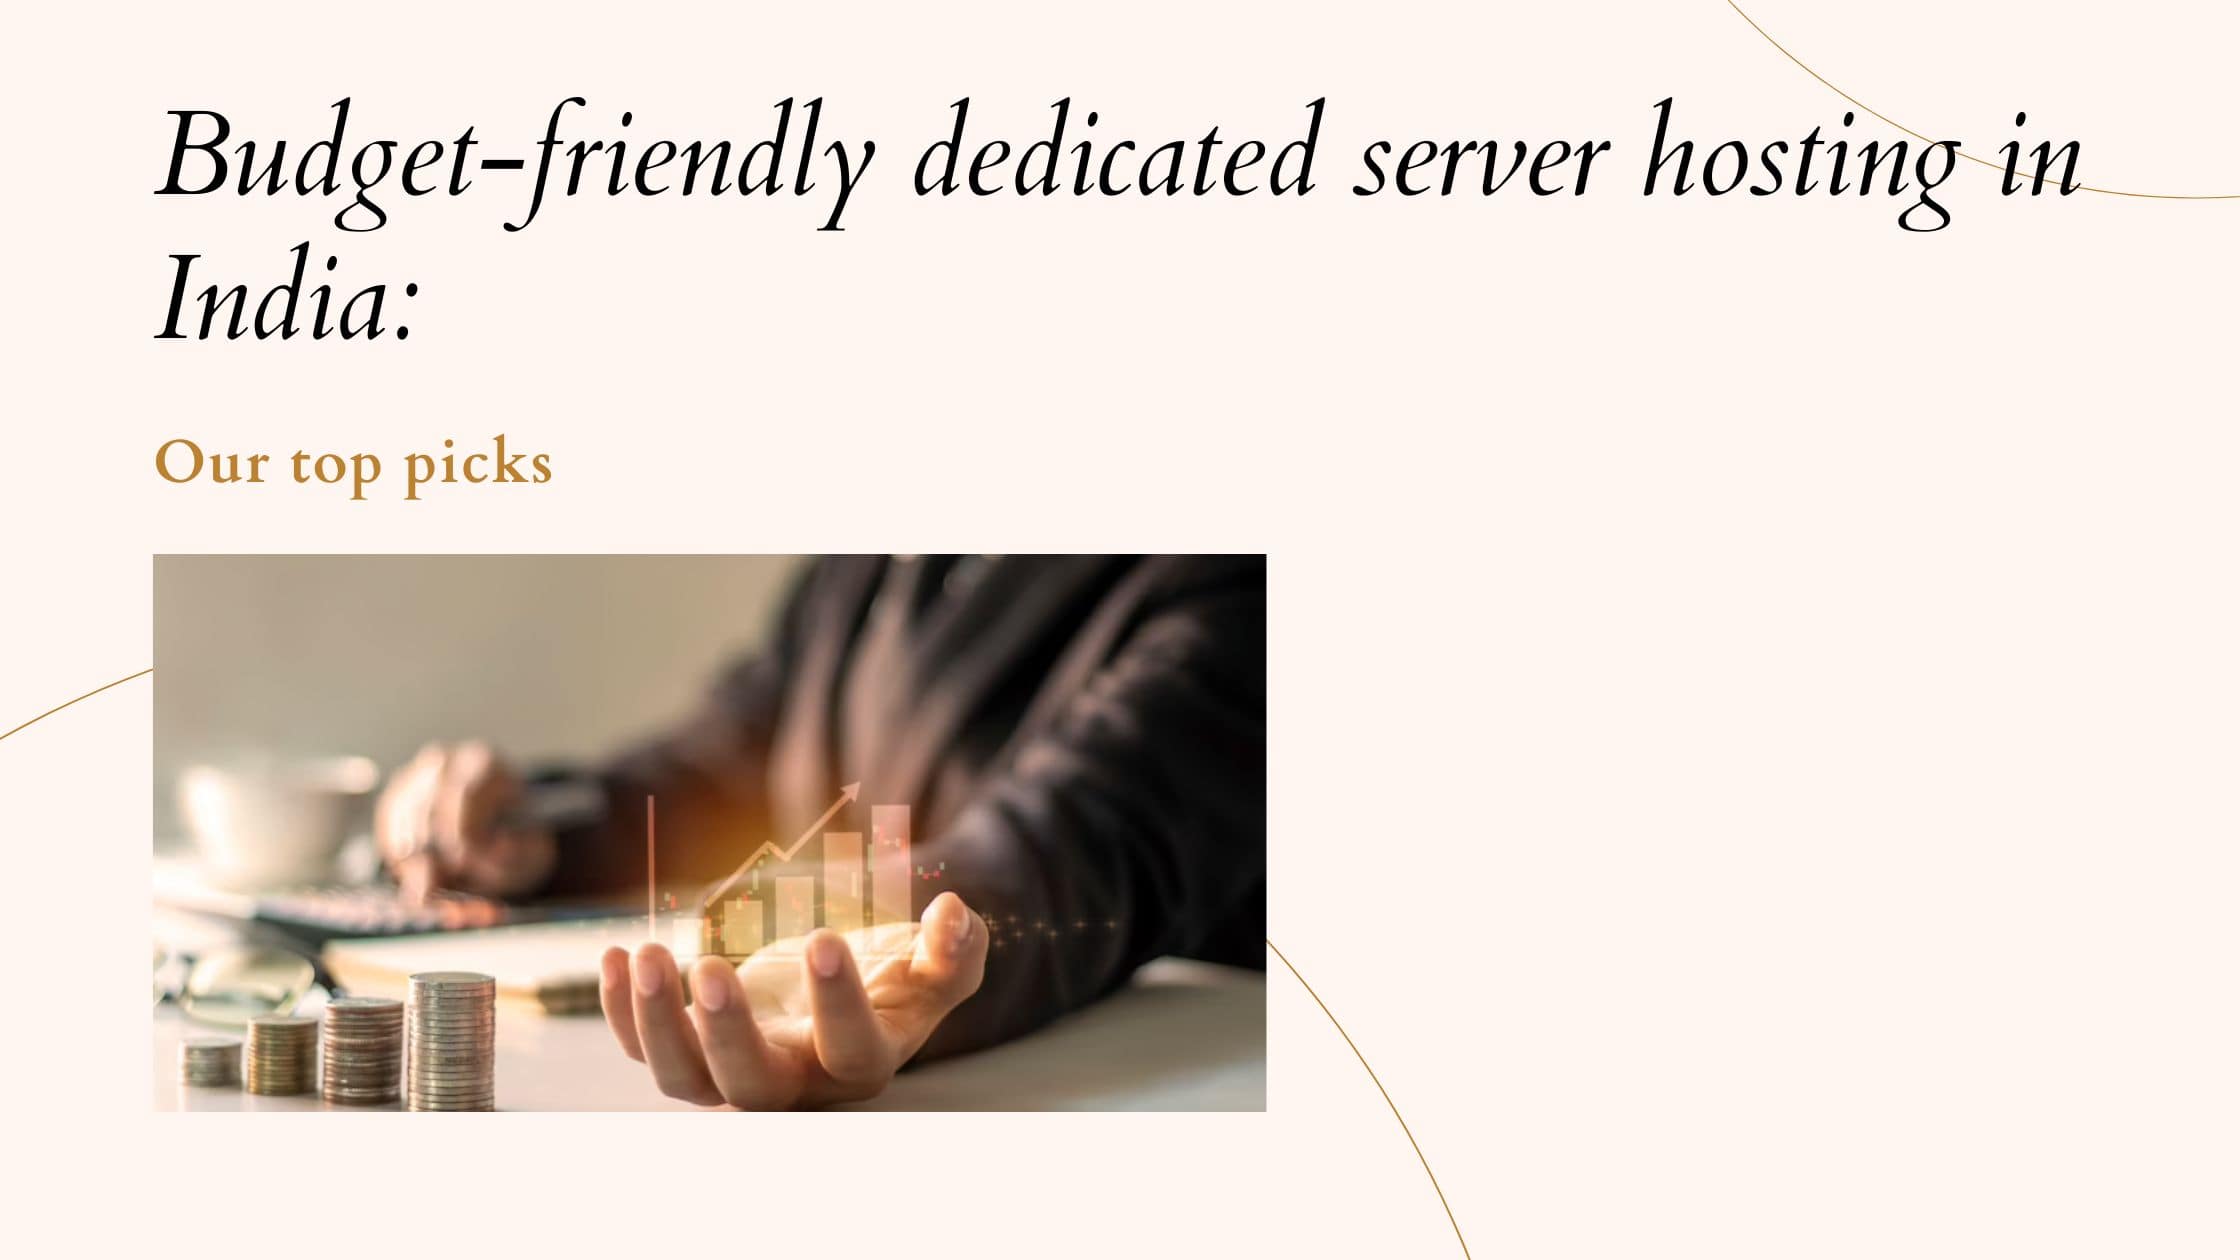 Budget-friendly dedicated server hosting in India: Our top picks